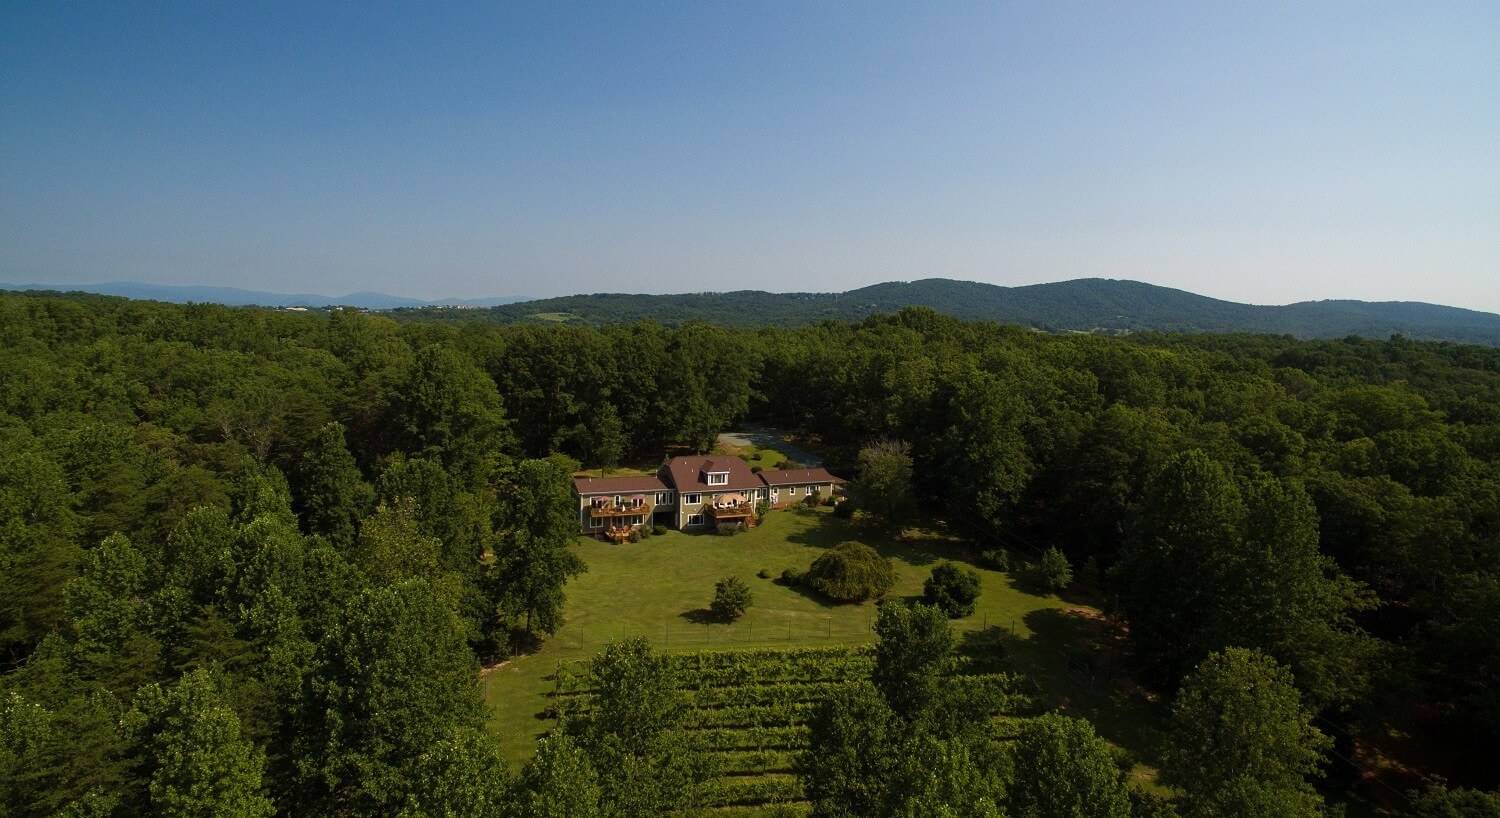 Aerial view of a large home nestled in dense trees with expansive lawn and vineyard